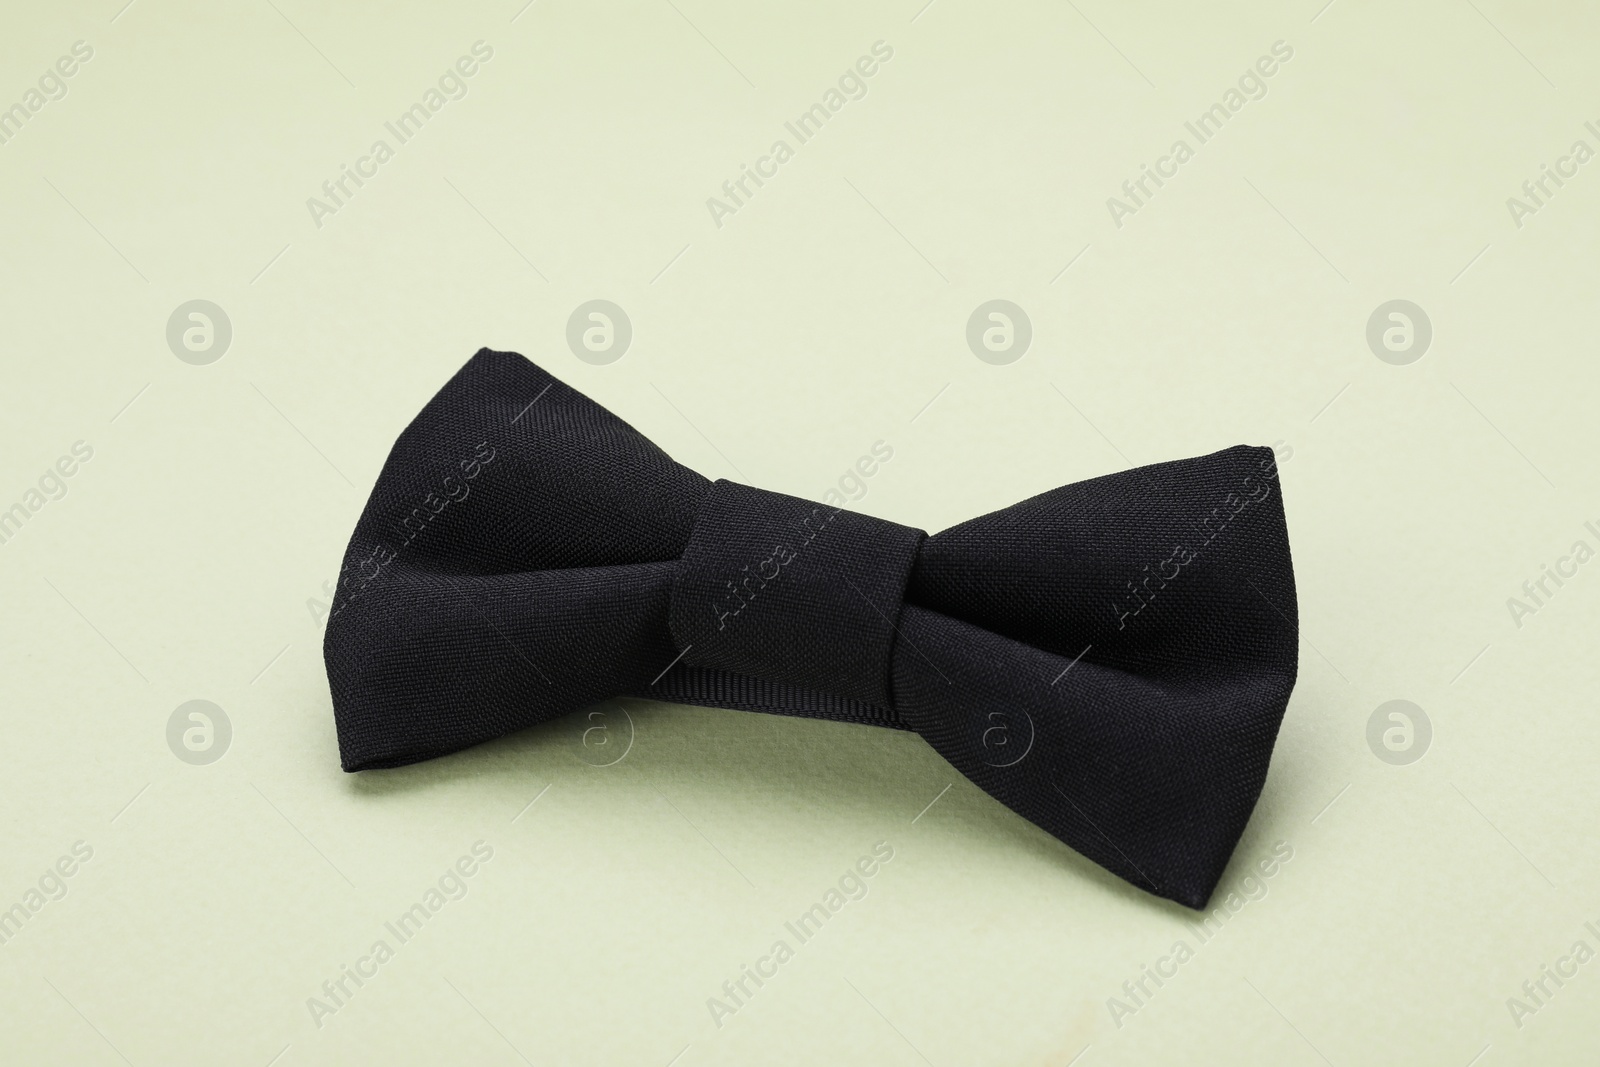 Photo of Stylish black bow tie on pale green background